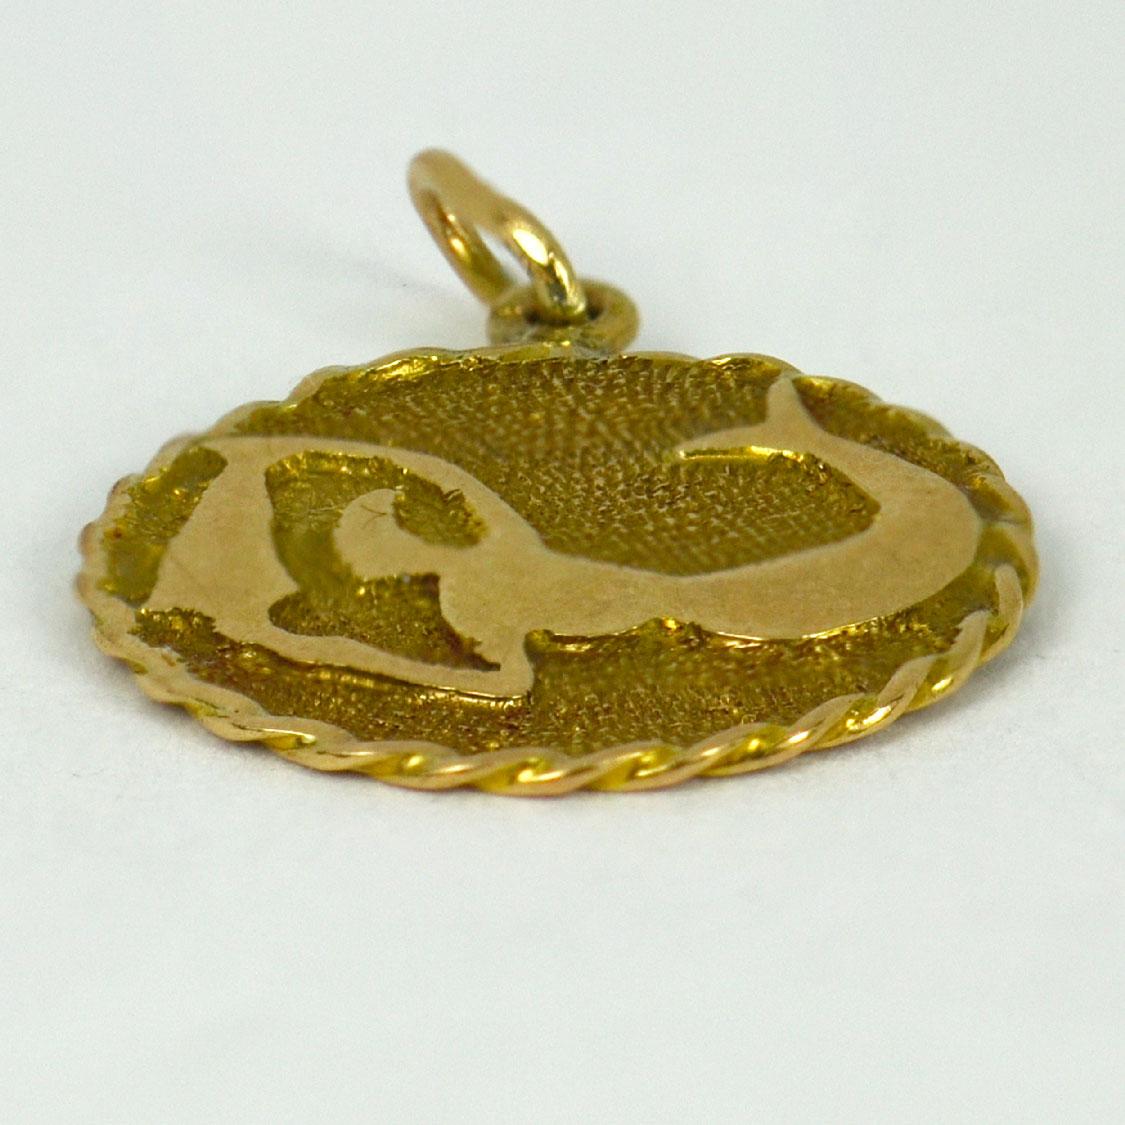 An 18 karat (18K) yellow gold charm pendant designed as a disc depicting a mermaid with a water jug to represent the Zodiac sign of Aquarius. Stamped with the owl mark for French import and 18 karat gold, engraved to the reverse